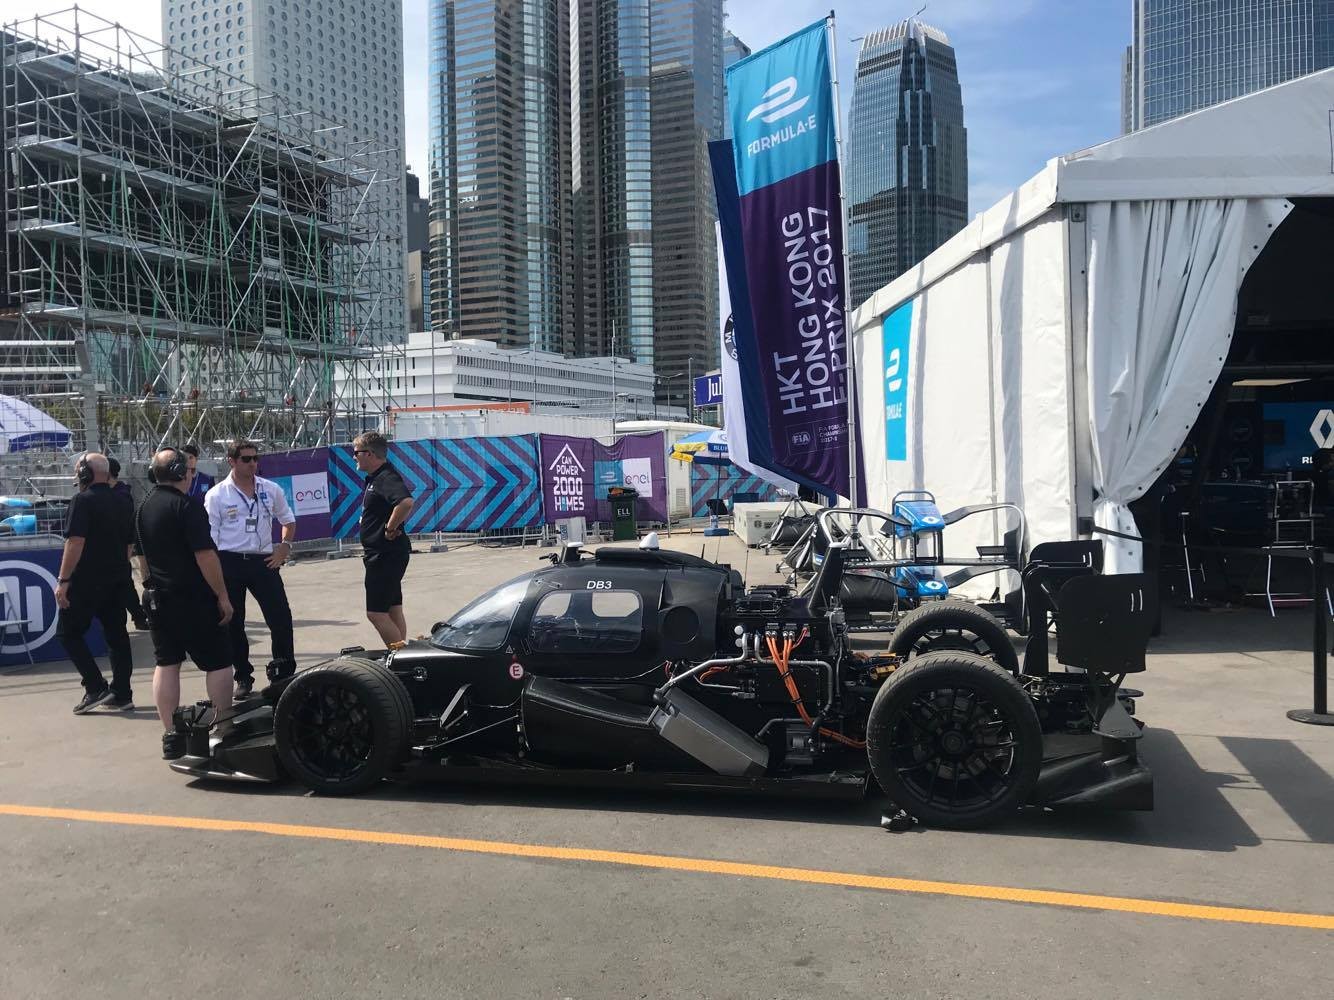 The Roborace DevBot is preparing for its first day of tests in Hong Kong. Photos: Andrew McNicol